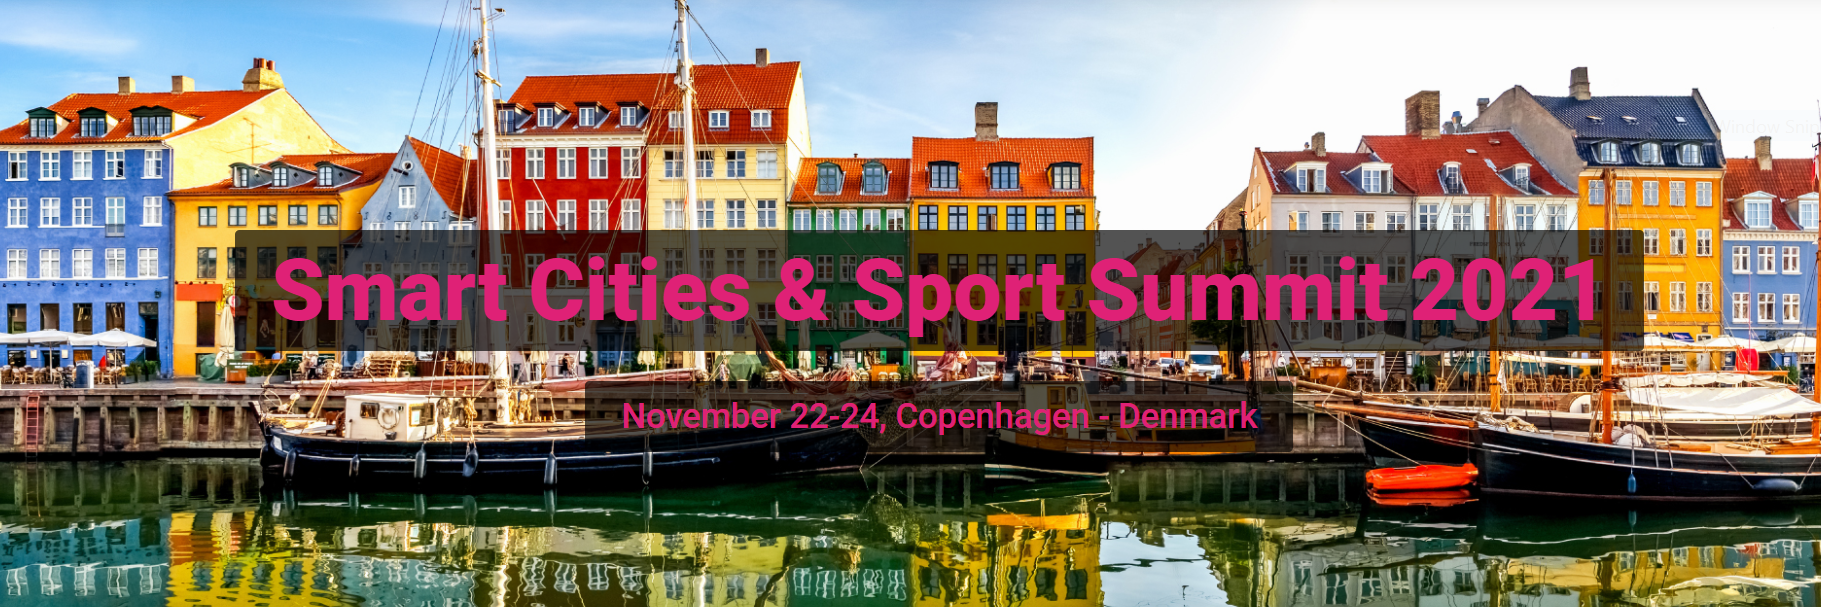 IOC President Thomas Bach has talked about the "here and now" legacy work conducted by Olympic host cities at the Smart Cities & Sport Summit in Copenhagen @SmartCTandSport